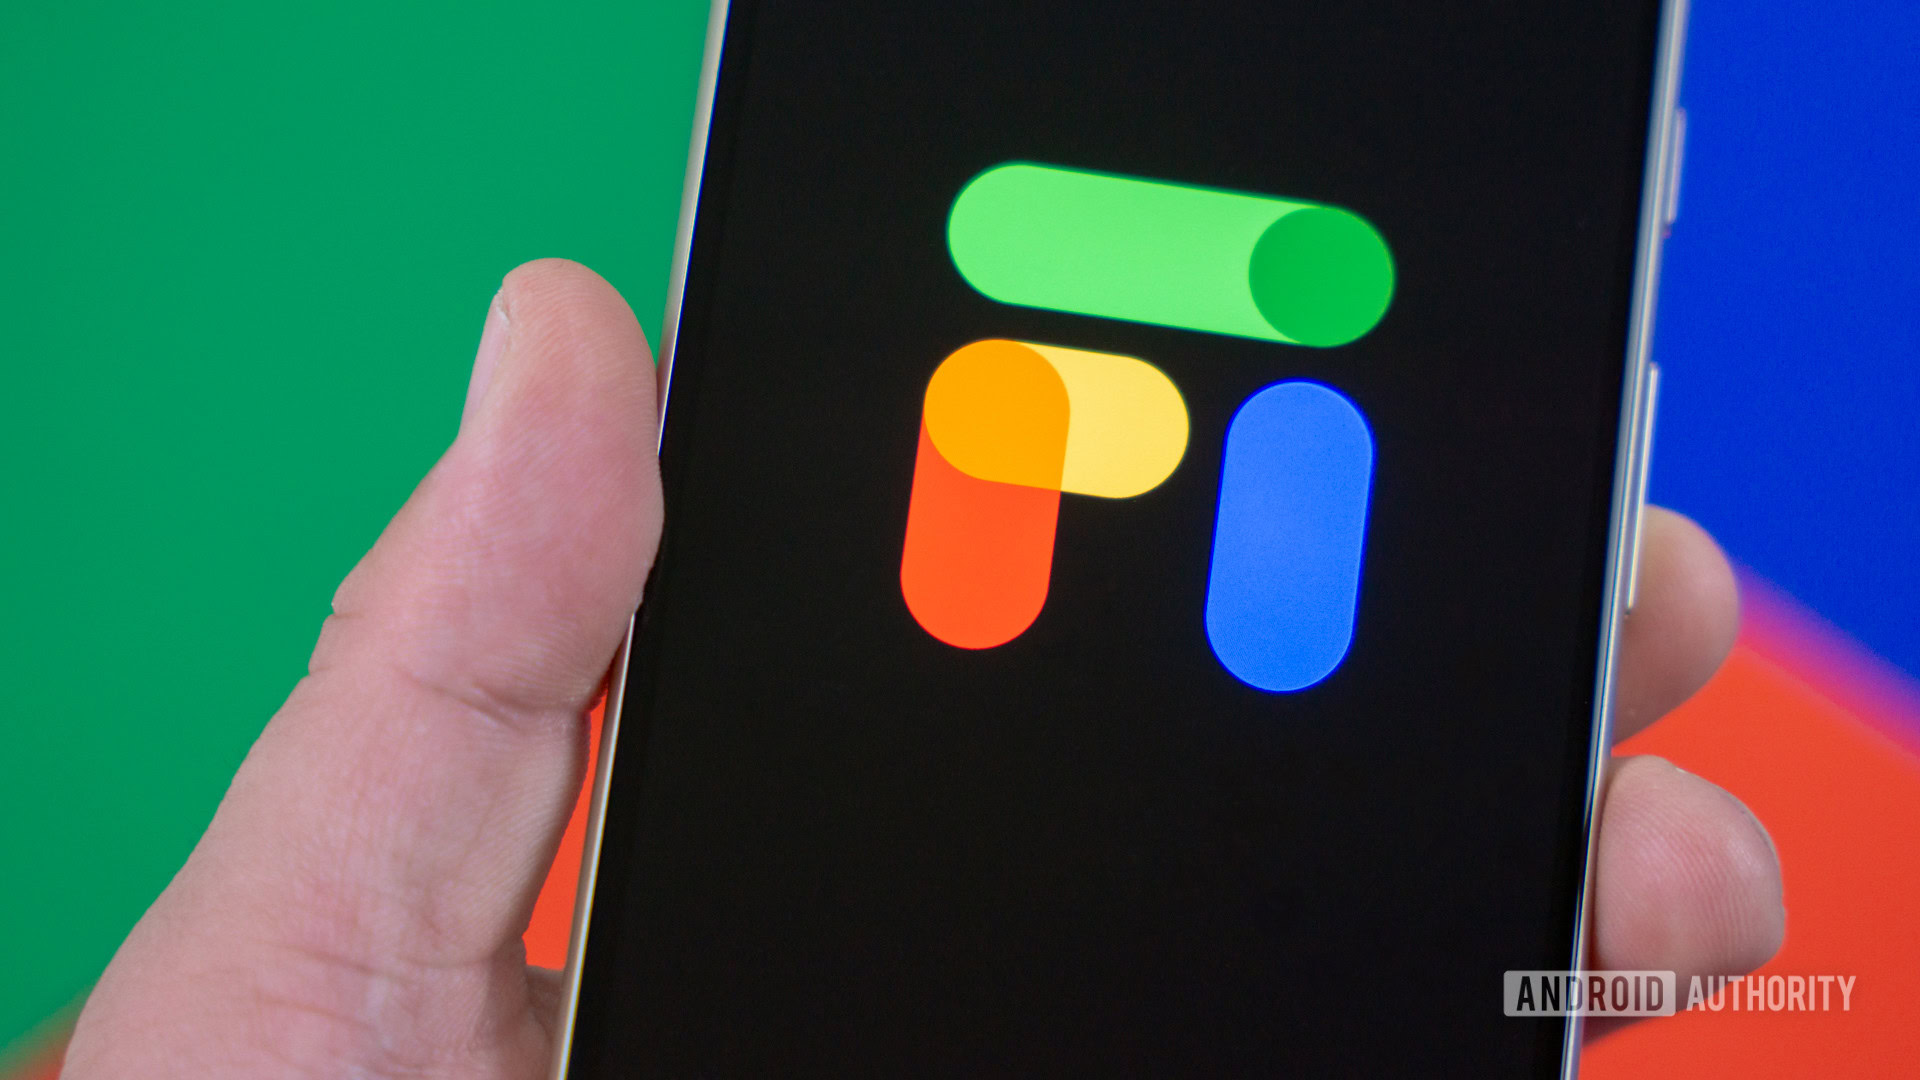 Stock photo of Google Fi logo on phone with colorful background 5